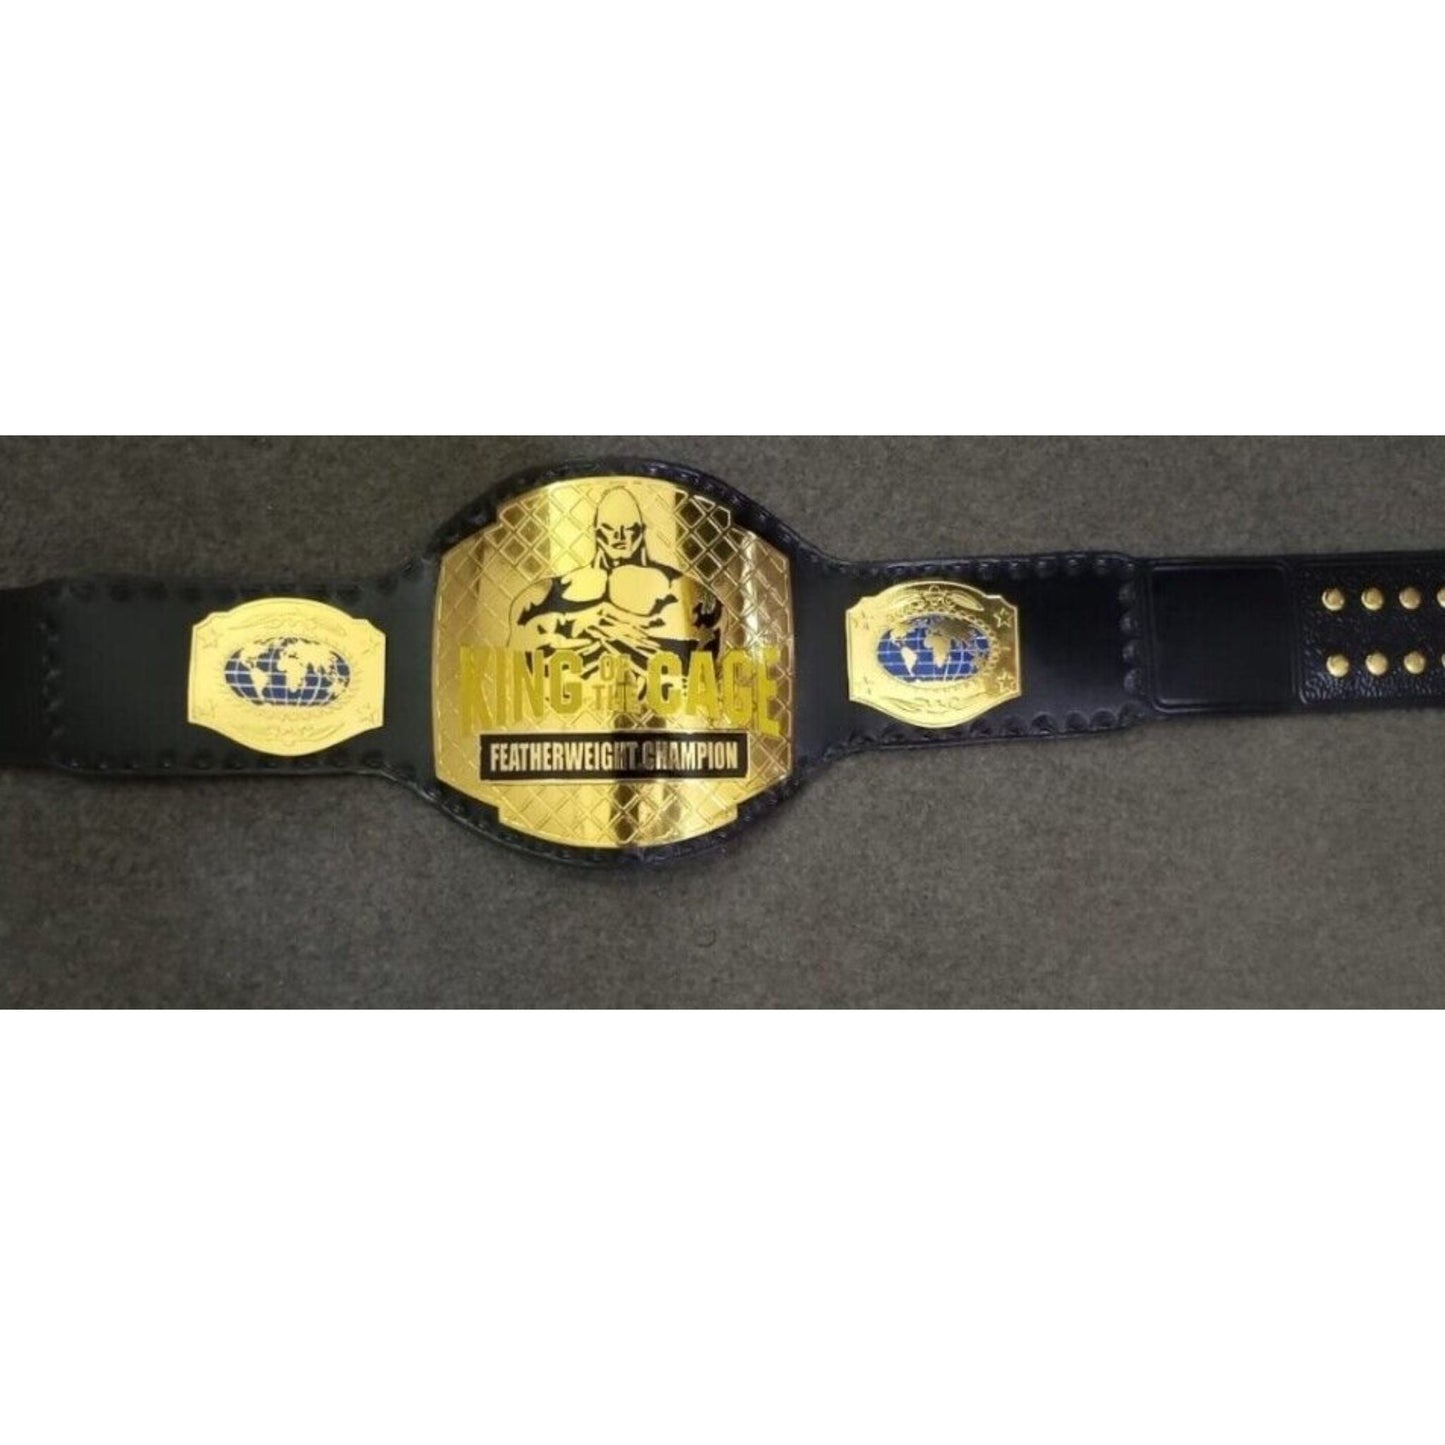 King Of The Cage KOTC MMA Wrestling Championship Leather Belt Adult Size